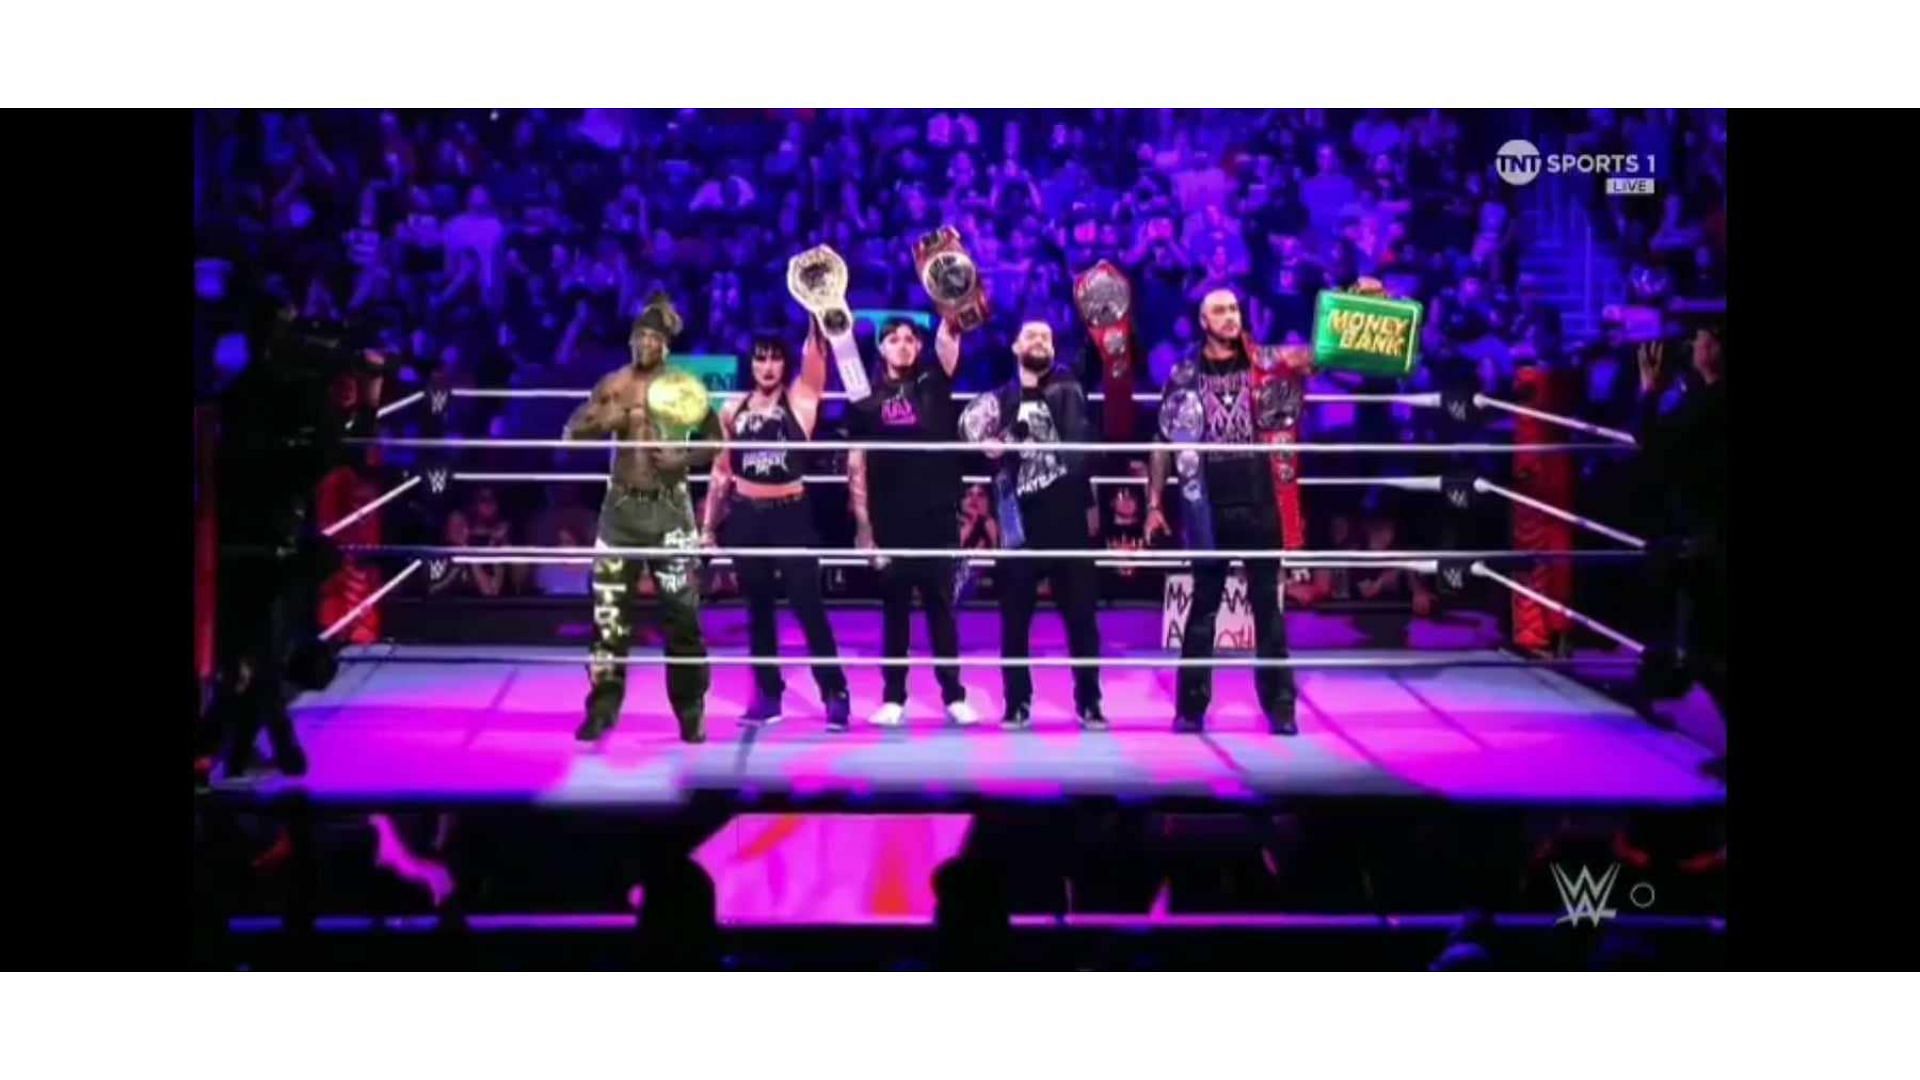 R-Truth was spotted holding the 24/7 Championship in a recent video package on WWE RAW.